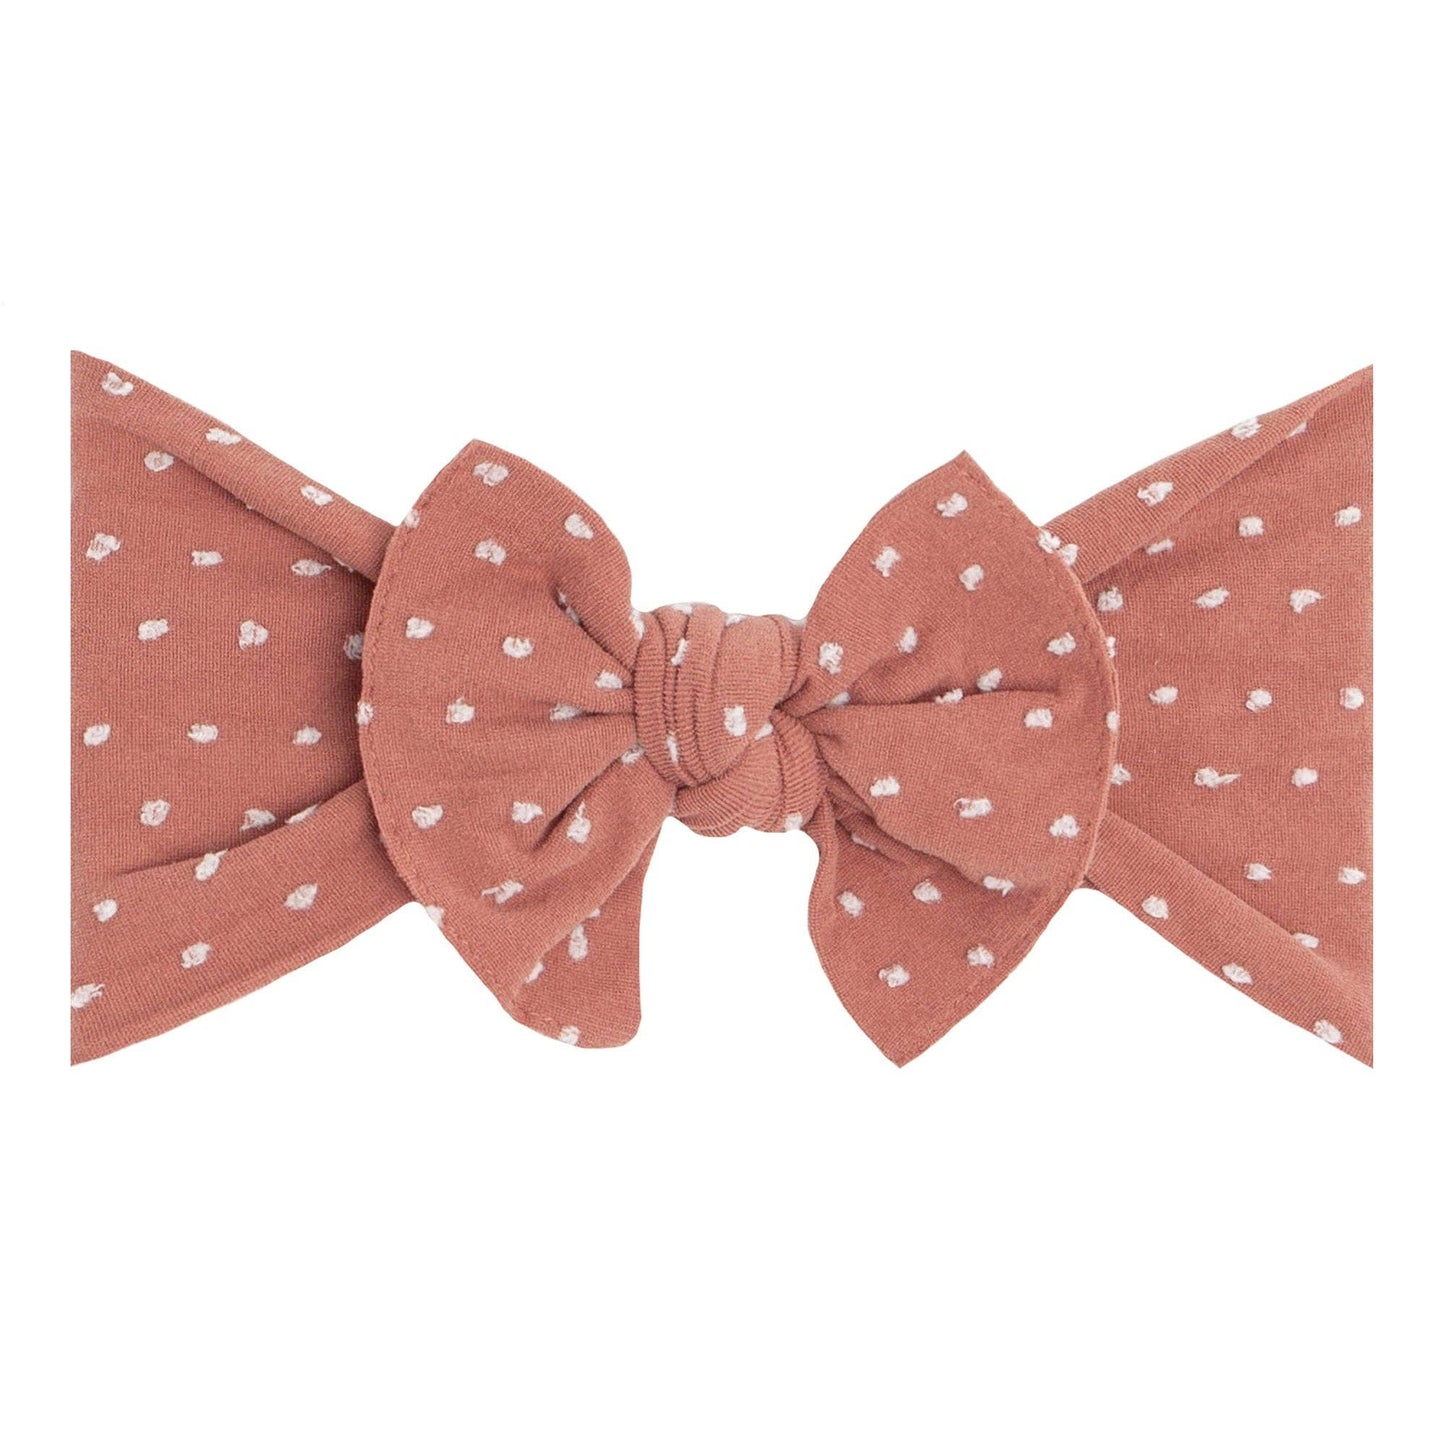 Baby Bling Bows - PATTERNED SHABBY KNOT: Putty / White dot